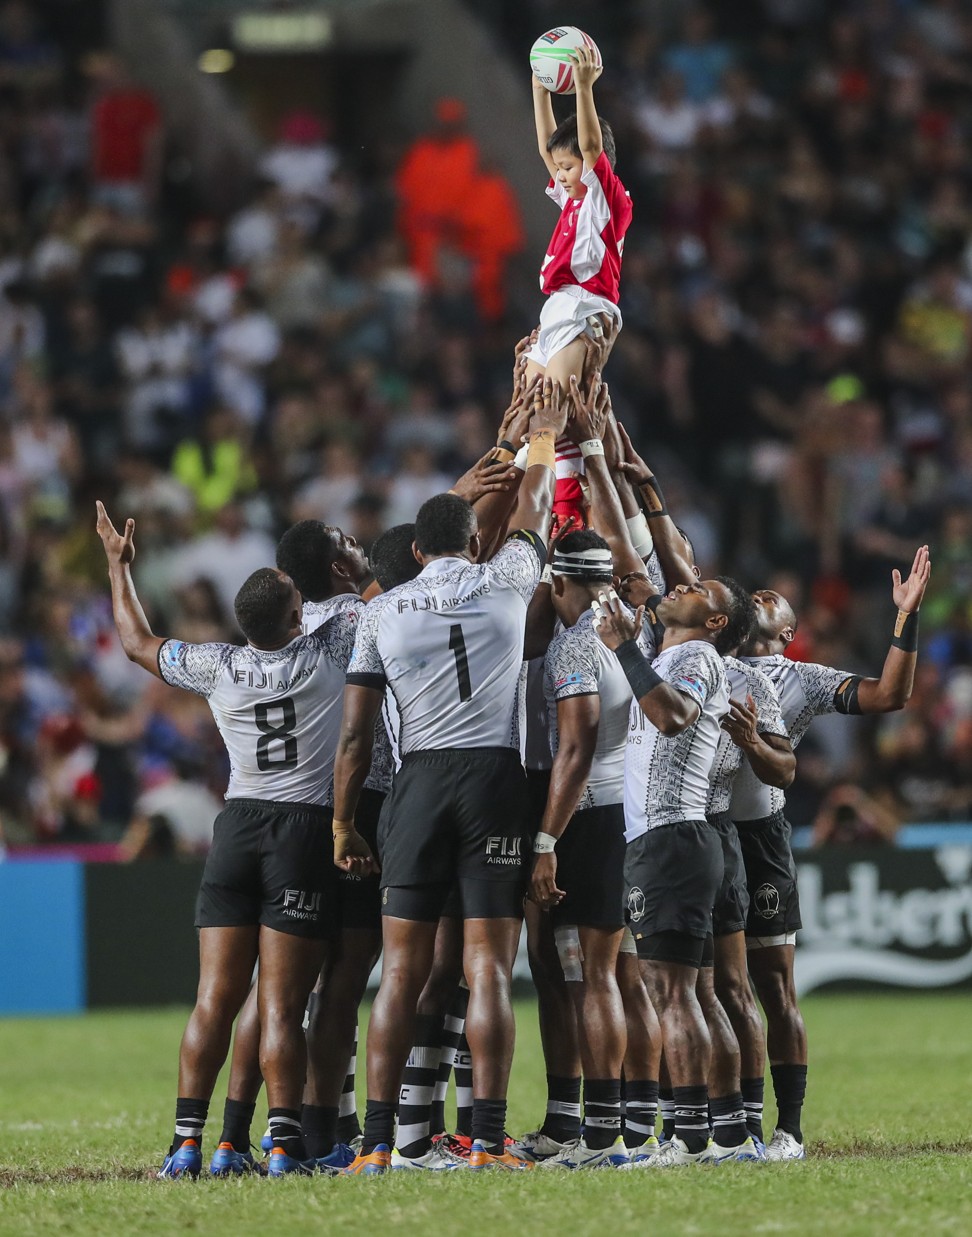 The Fijians provide a moment to remember for a young ballboy. Photo: Sam Tsang